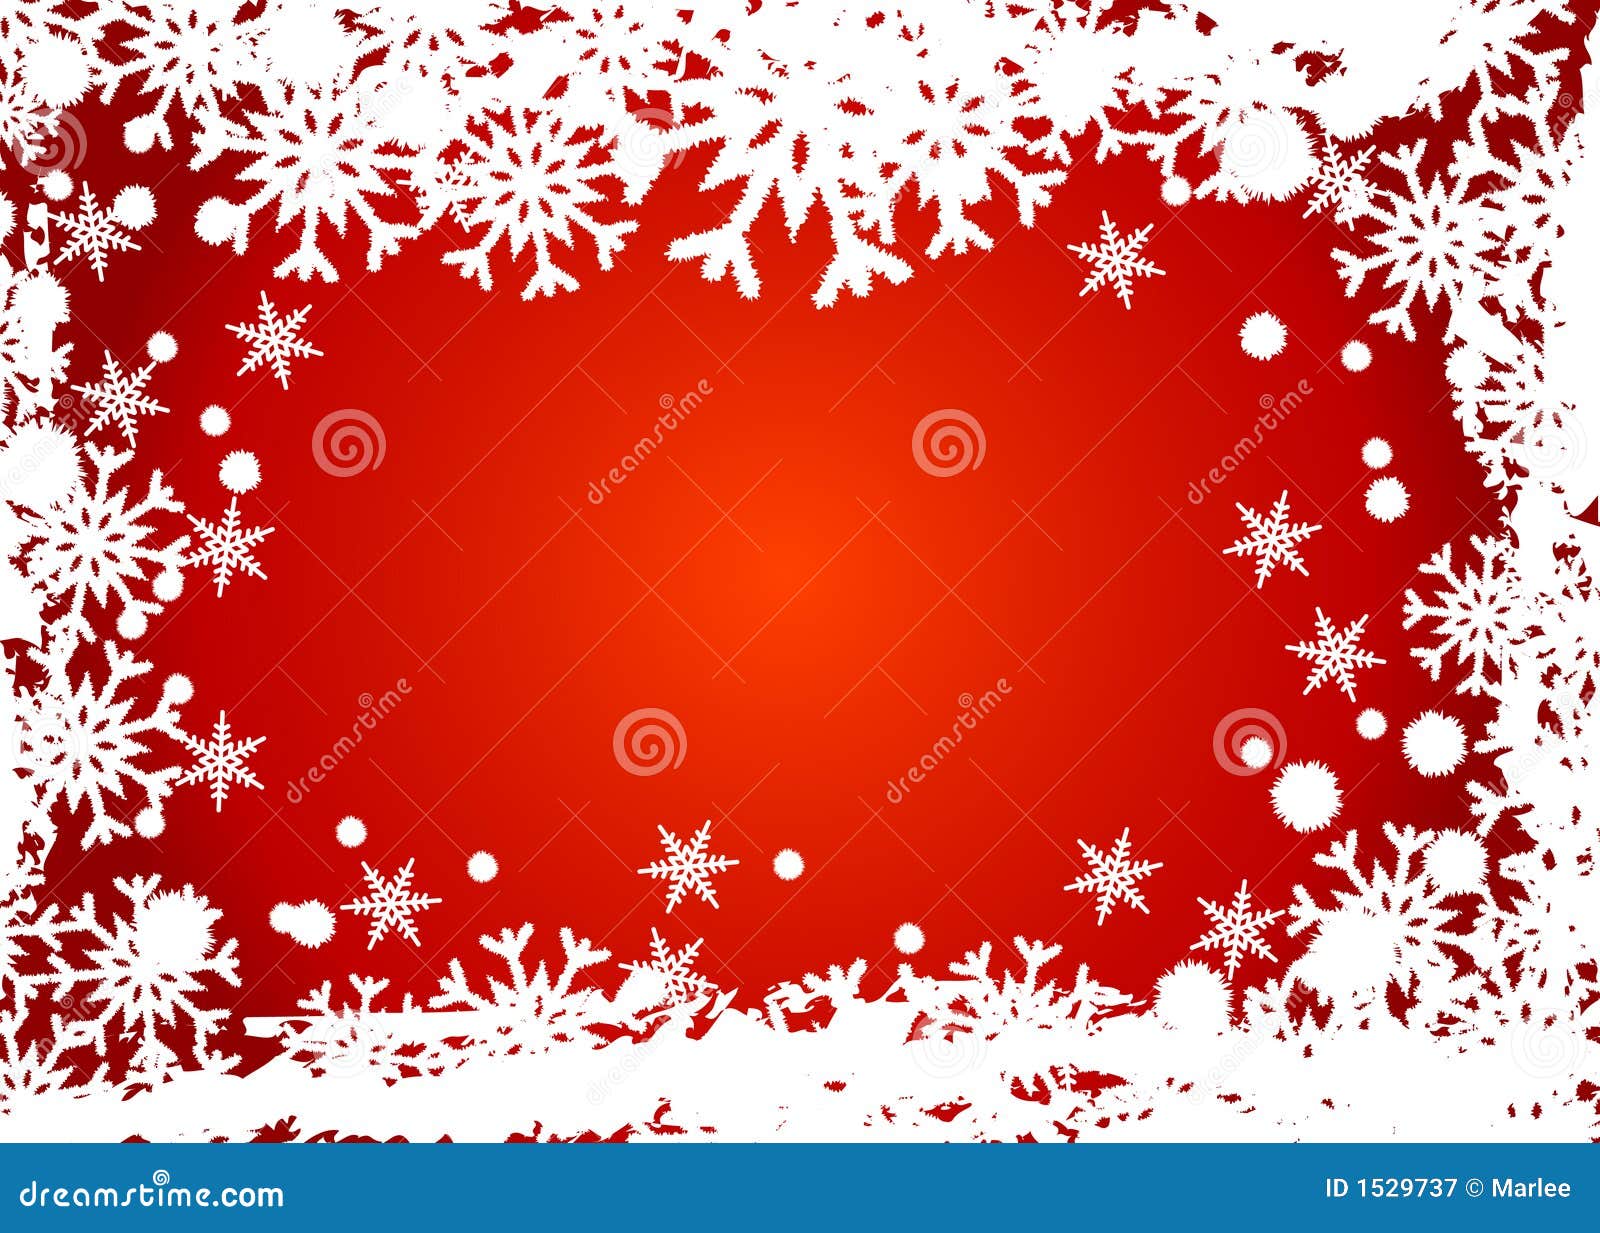 Red Snowflakes Frame Royalty Free Stock Photography - Image: 1529737